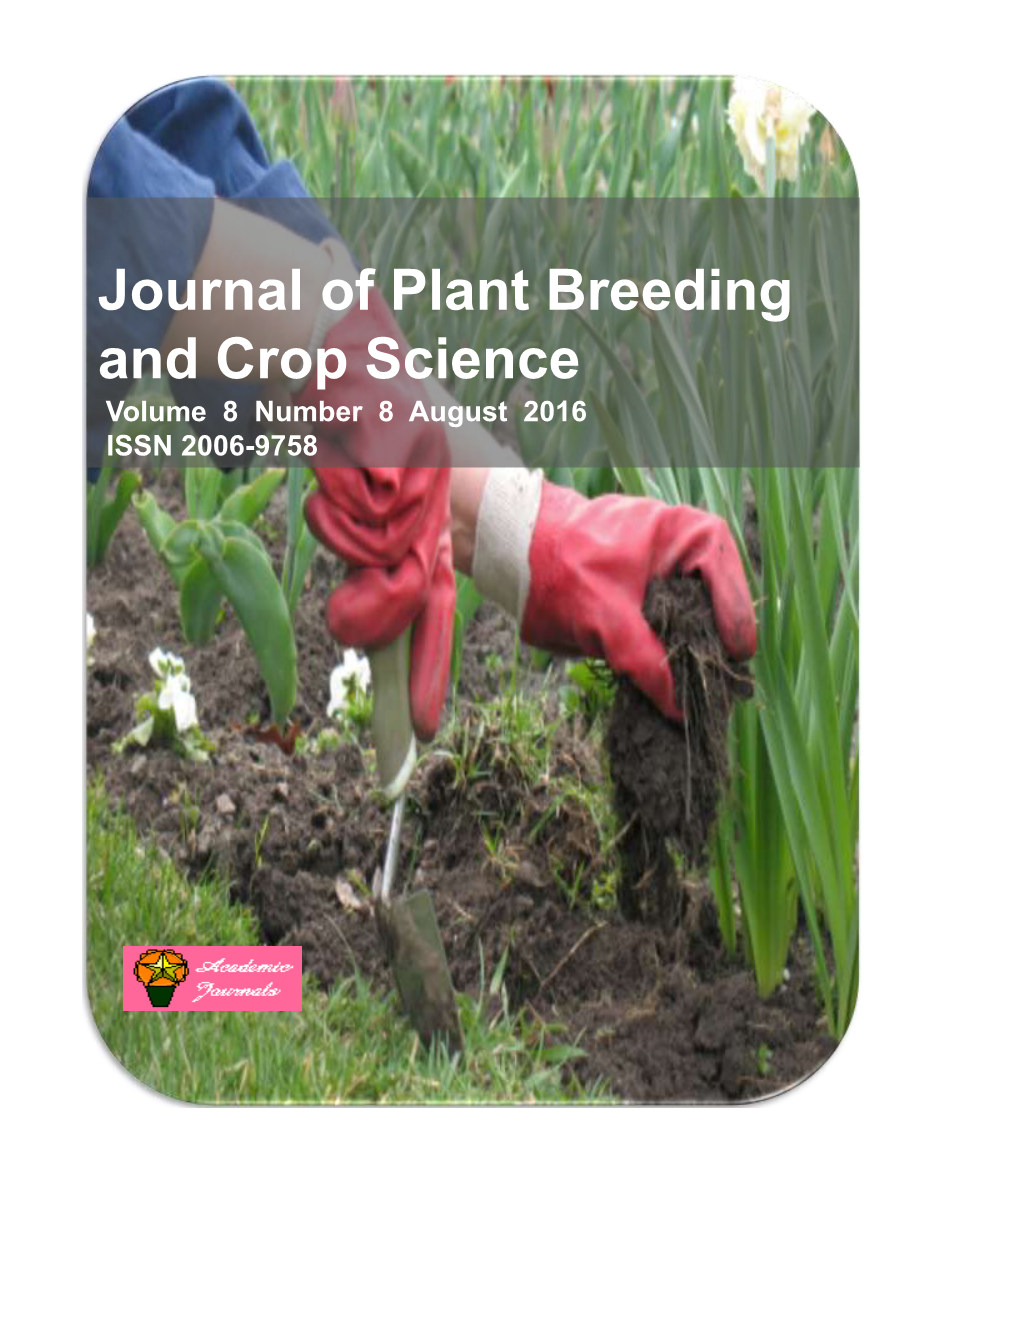 Journal of Plant Breeding and Crop Science Volume 8 Number 8 August 2016 ISSN 2006-9758